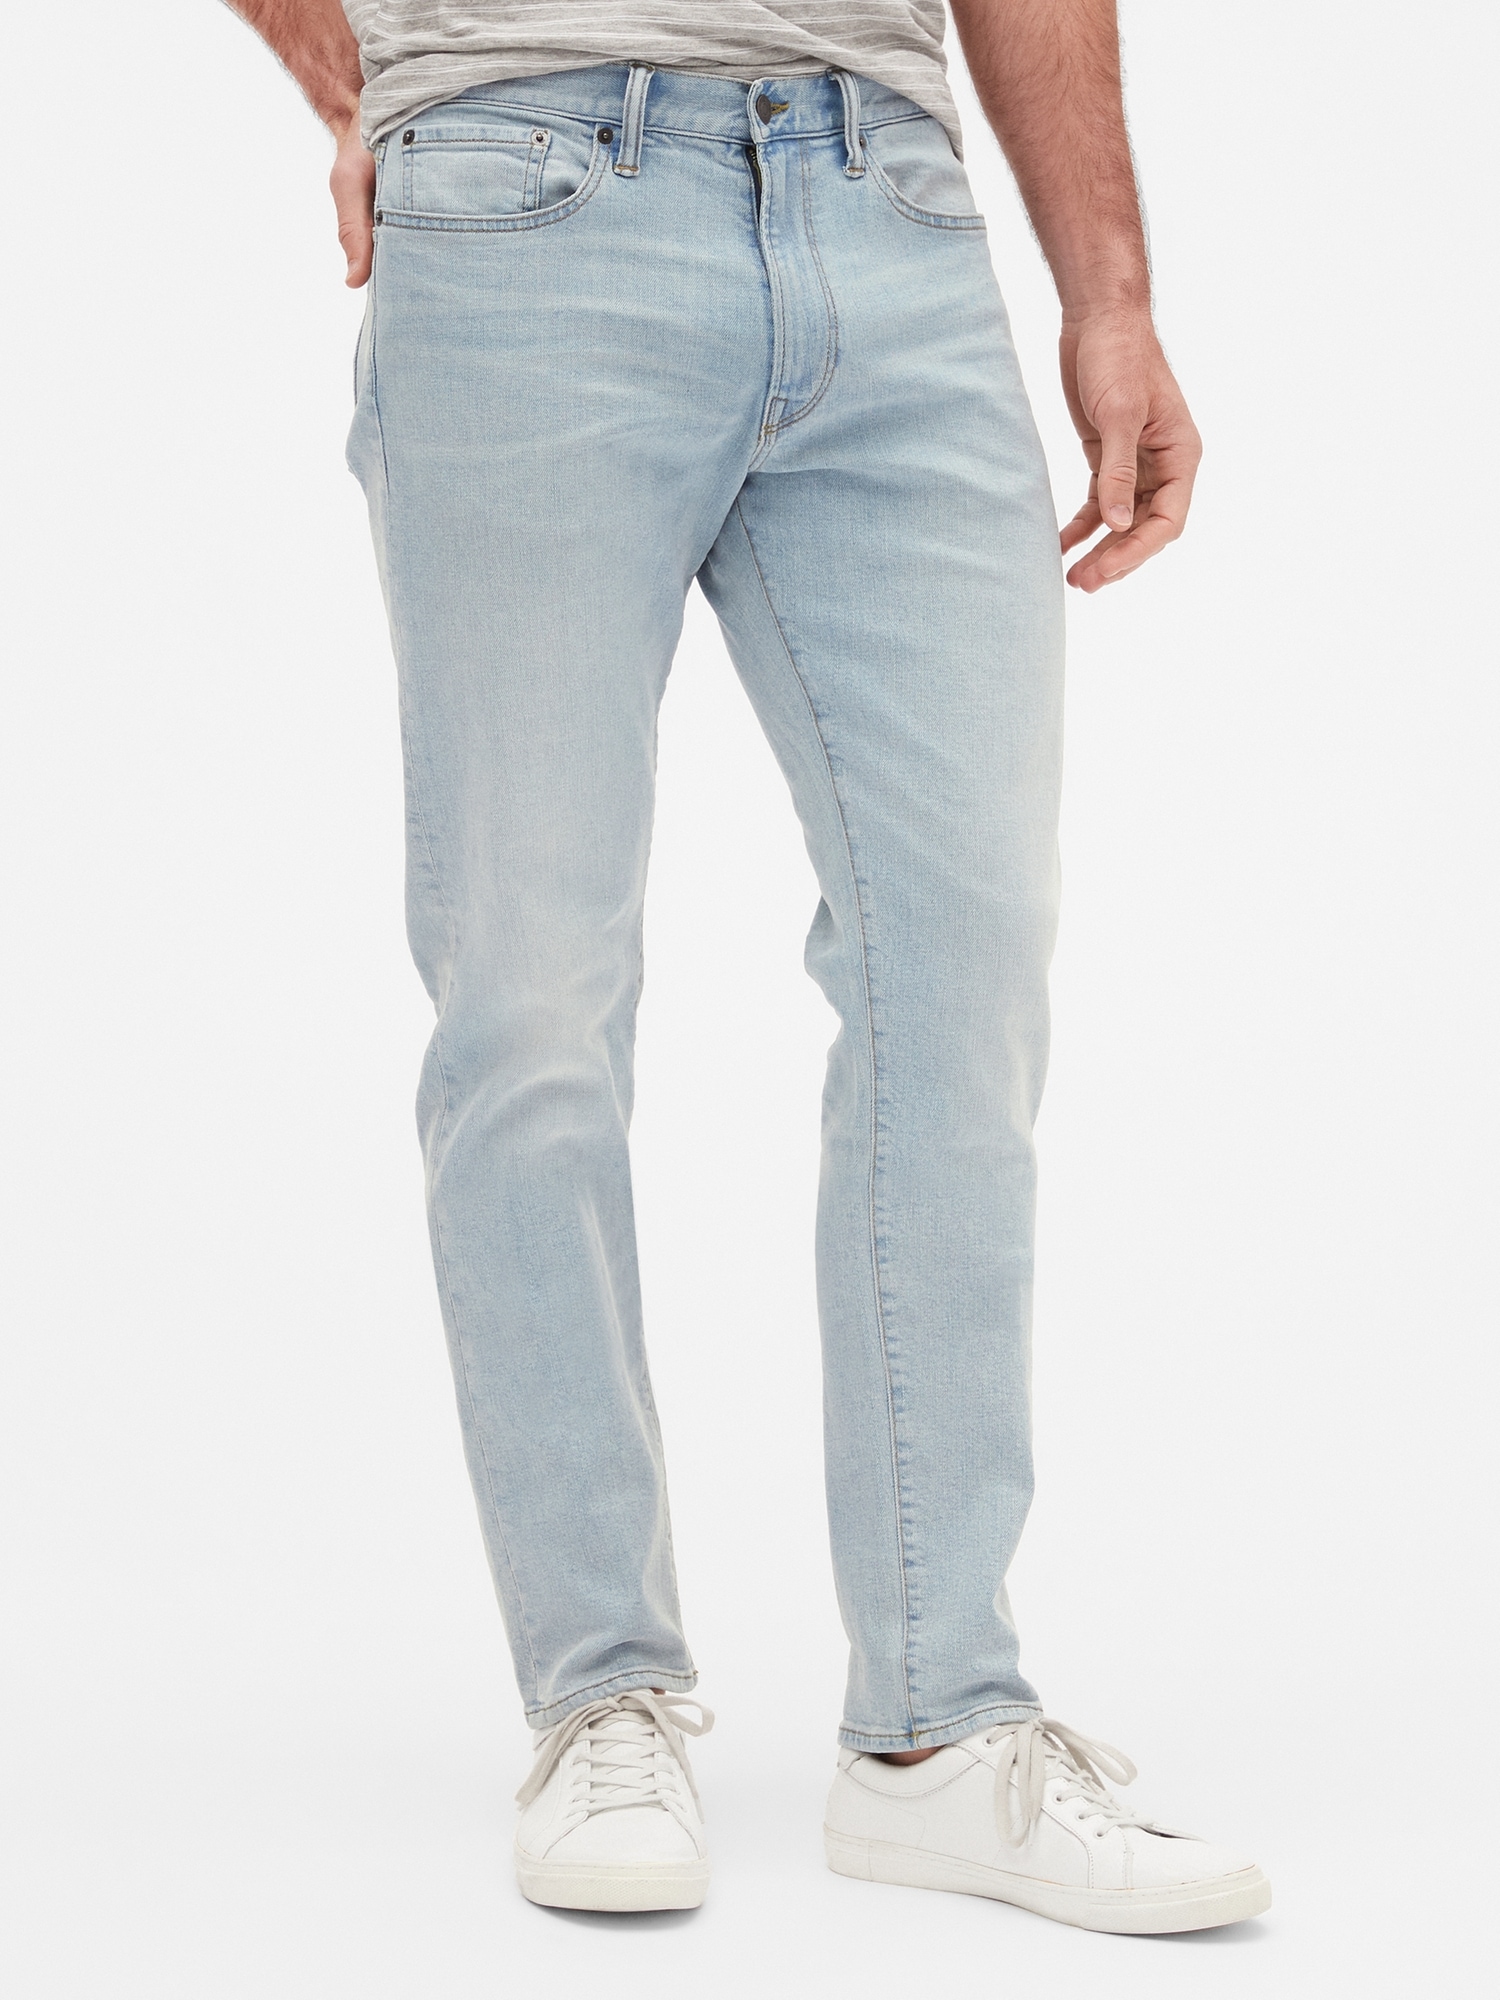 banana republic athletic tapered jeans